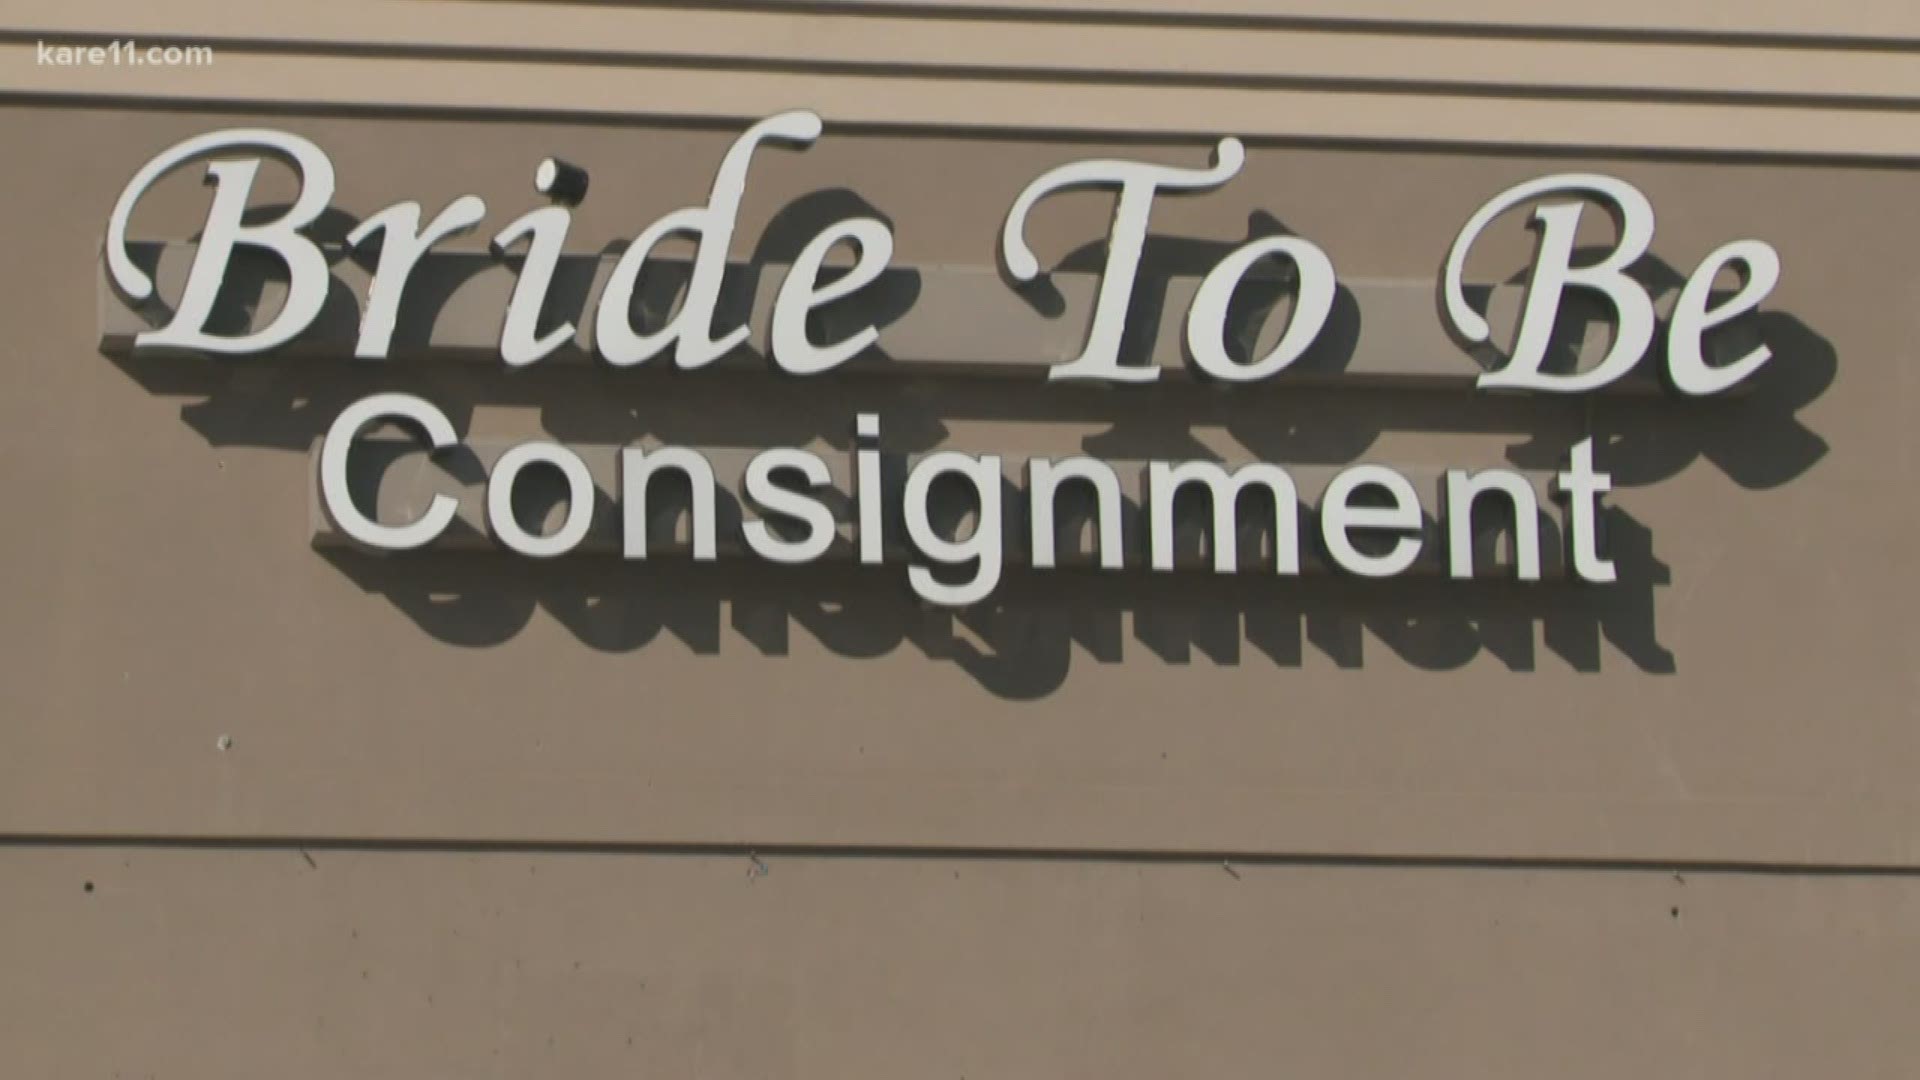 Several women who have tried to sell their wedding dresses and items at a consignment store in Lake Elmo say they've not heard from the shop ever since it closed.